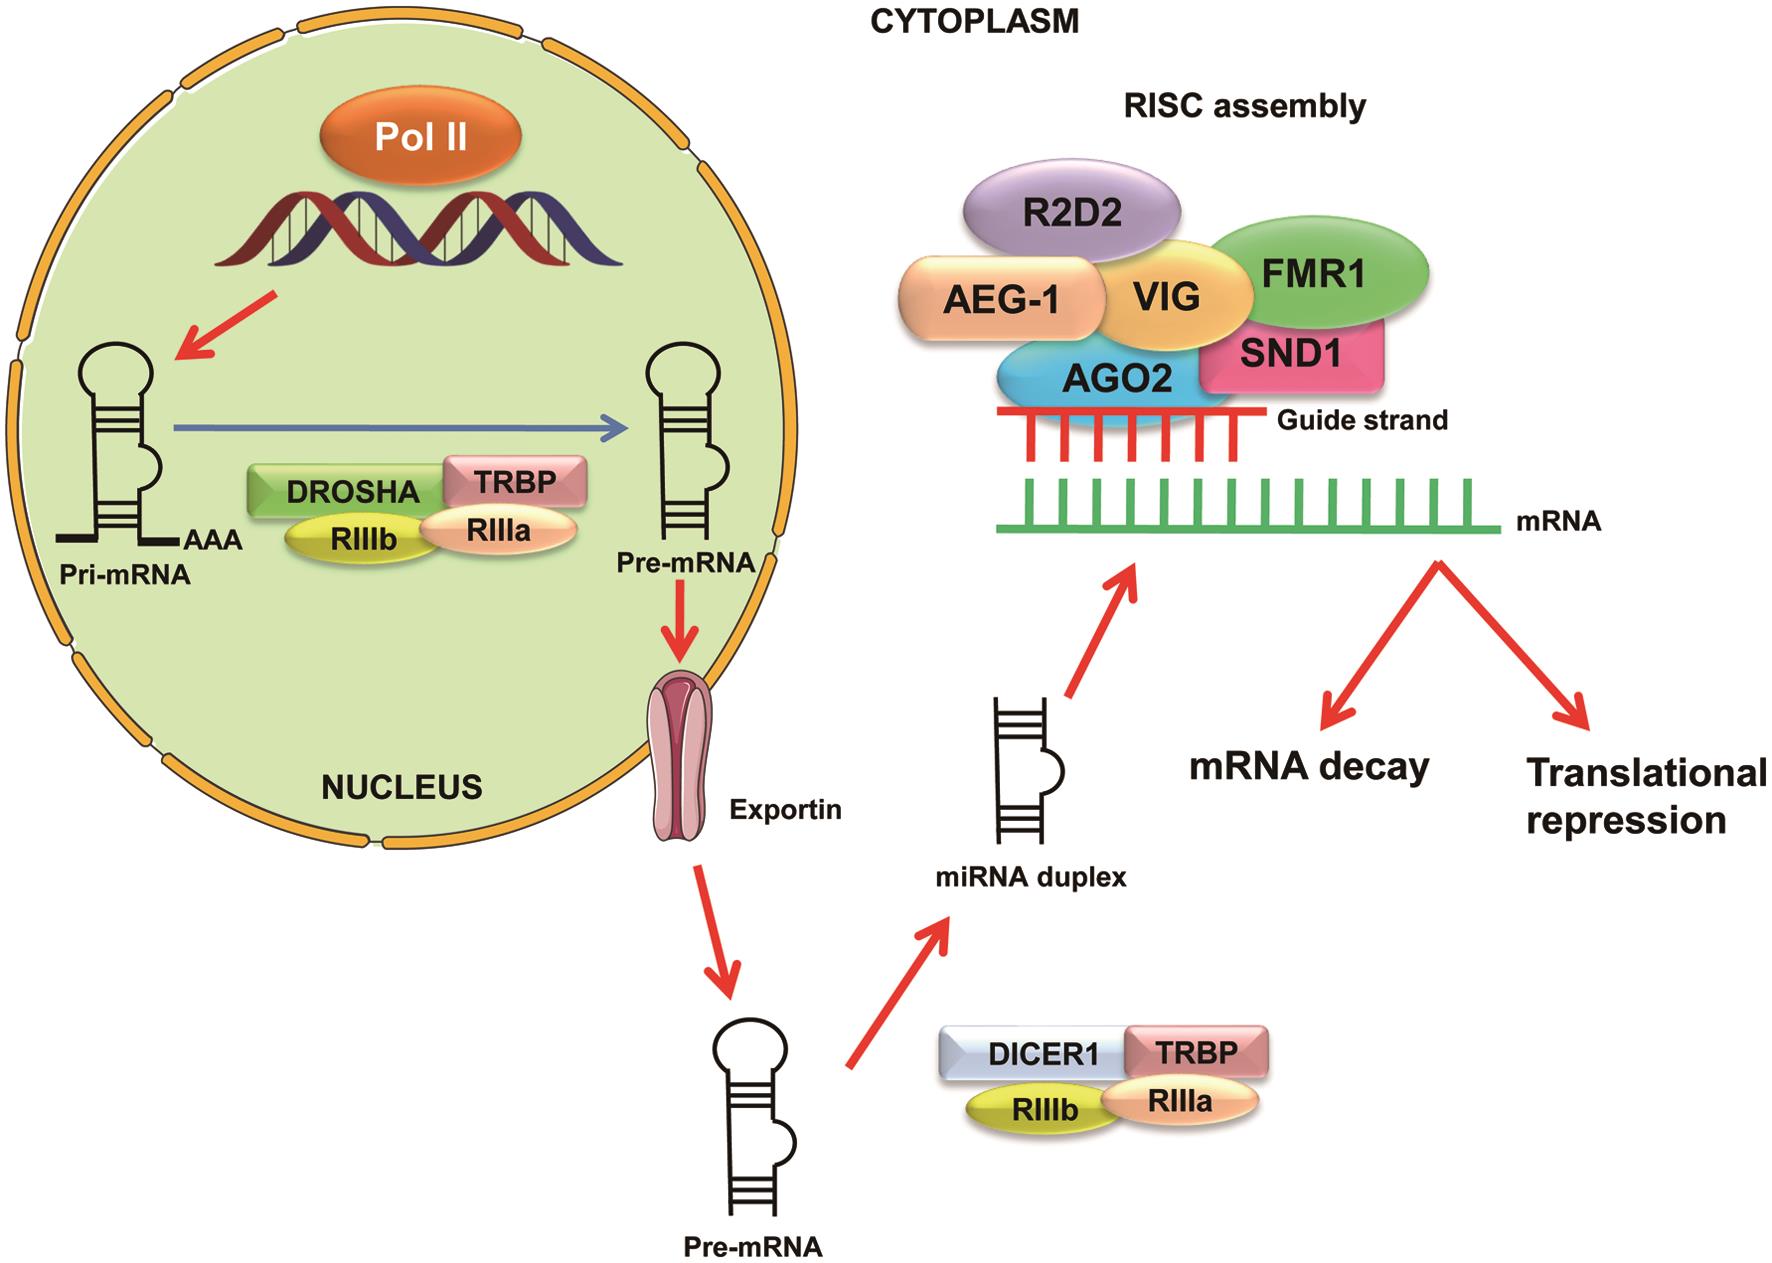 Downregulation of microRNA-34 induces cell proliferation and